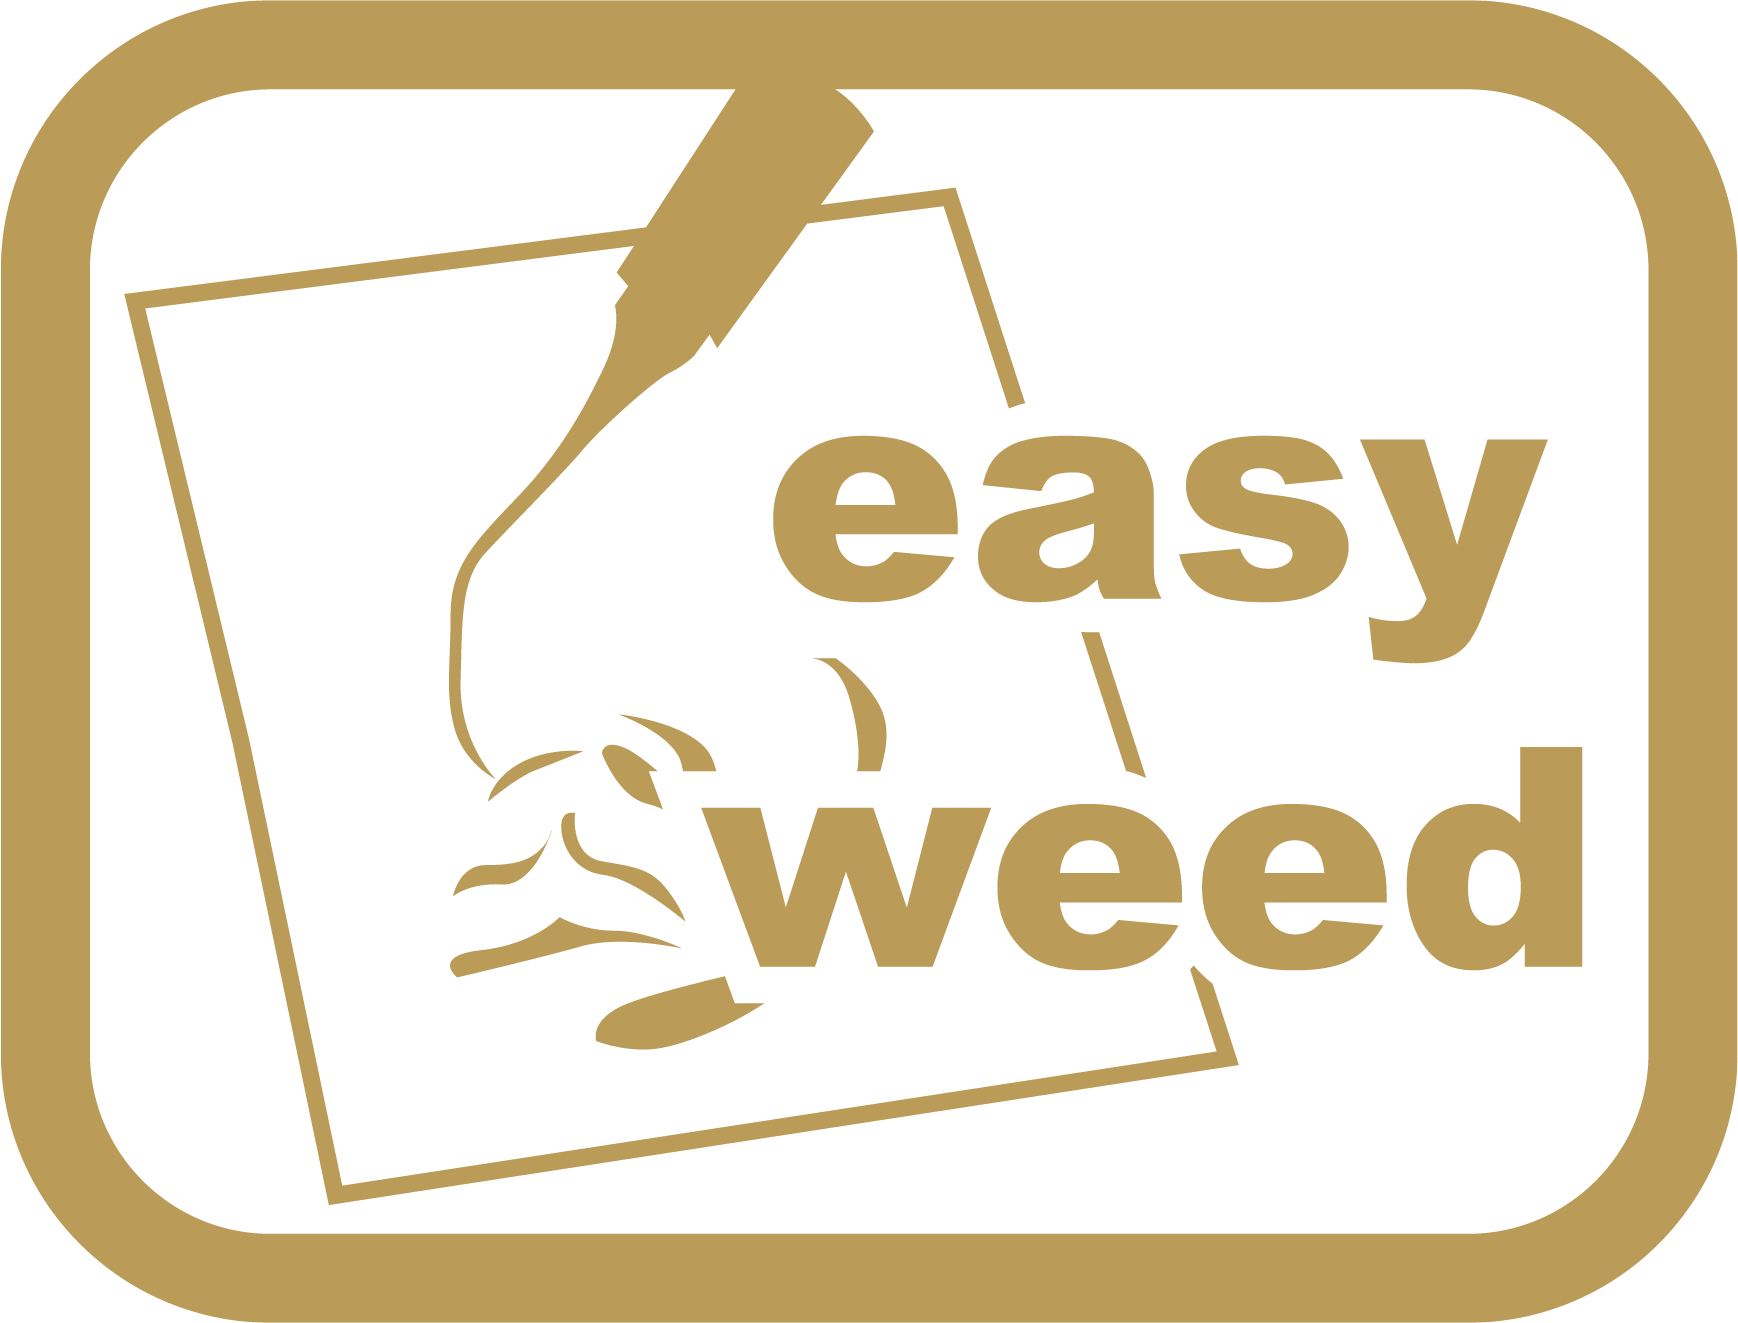 Easy to weed